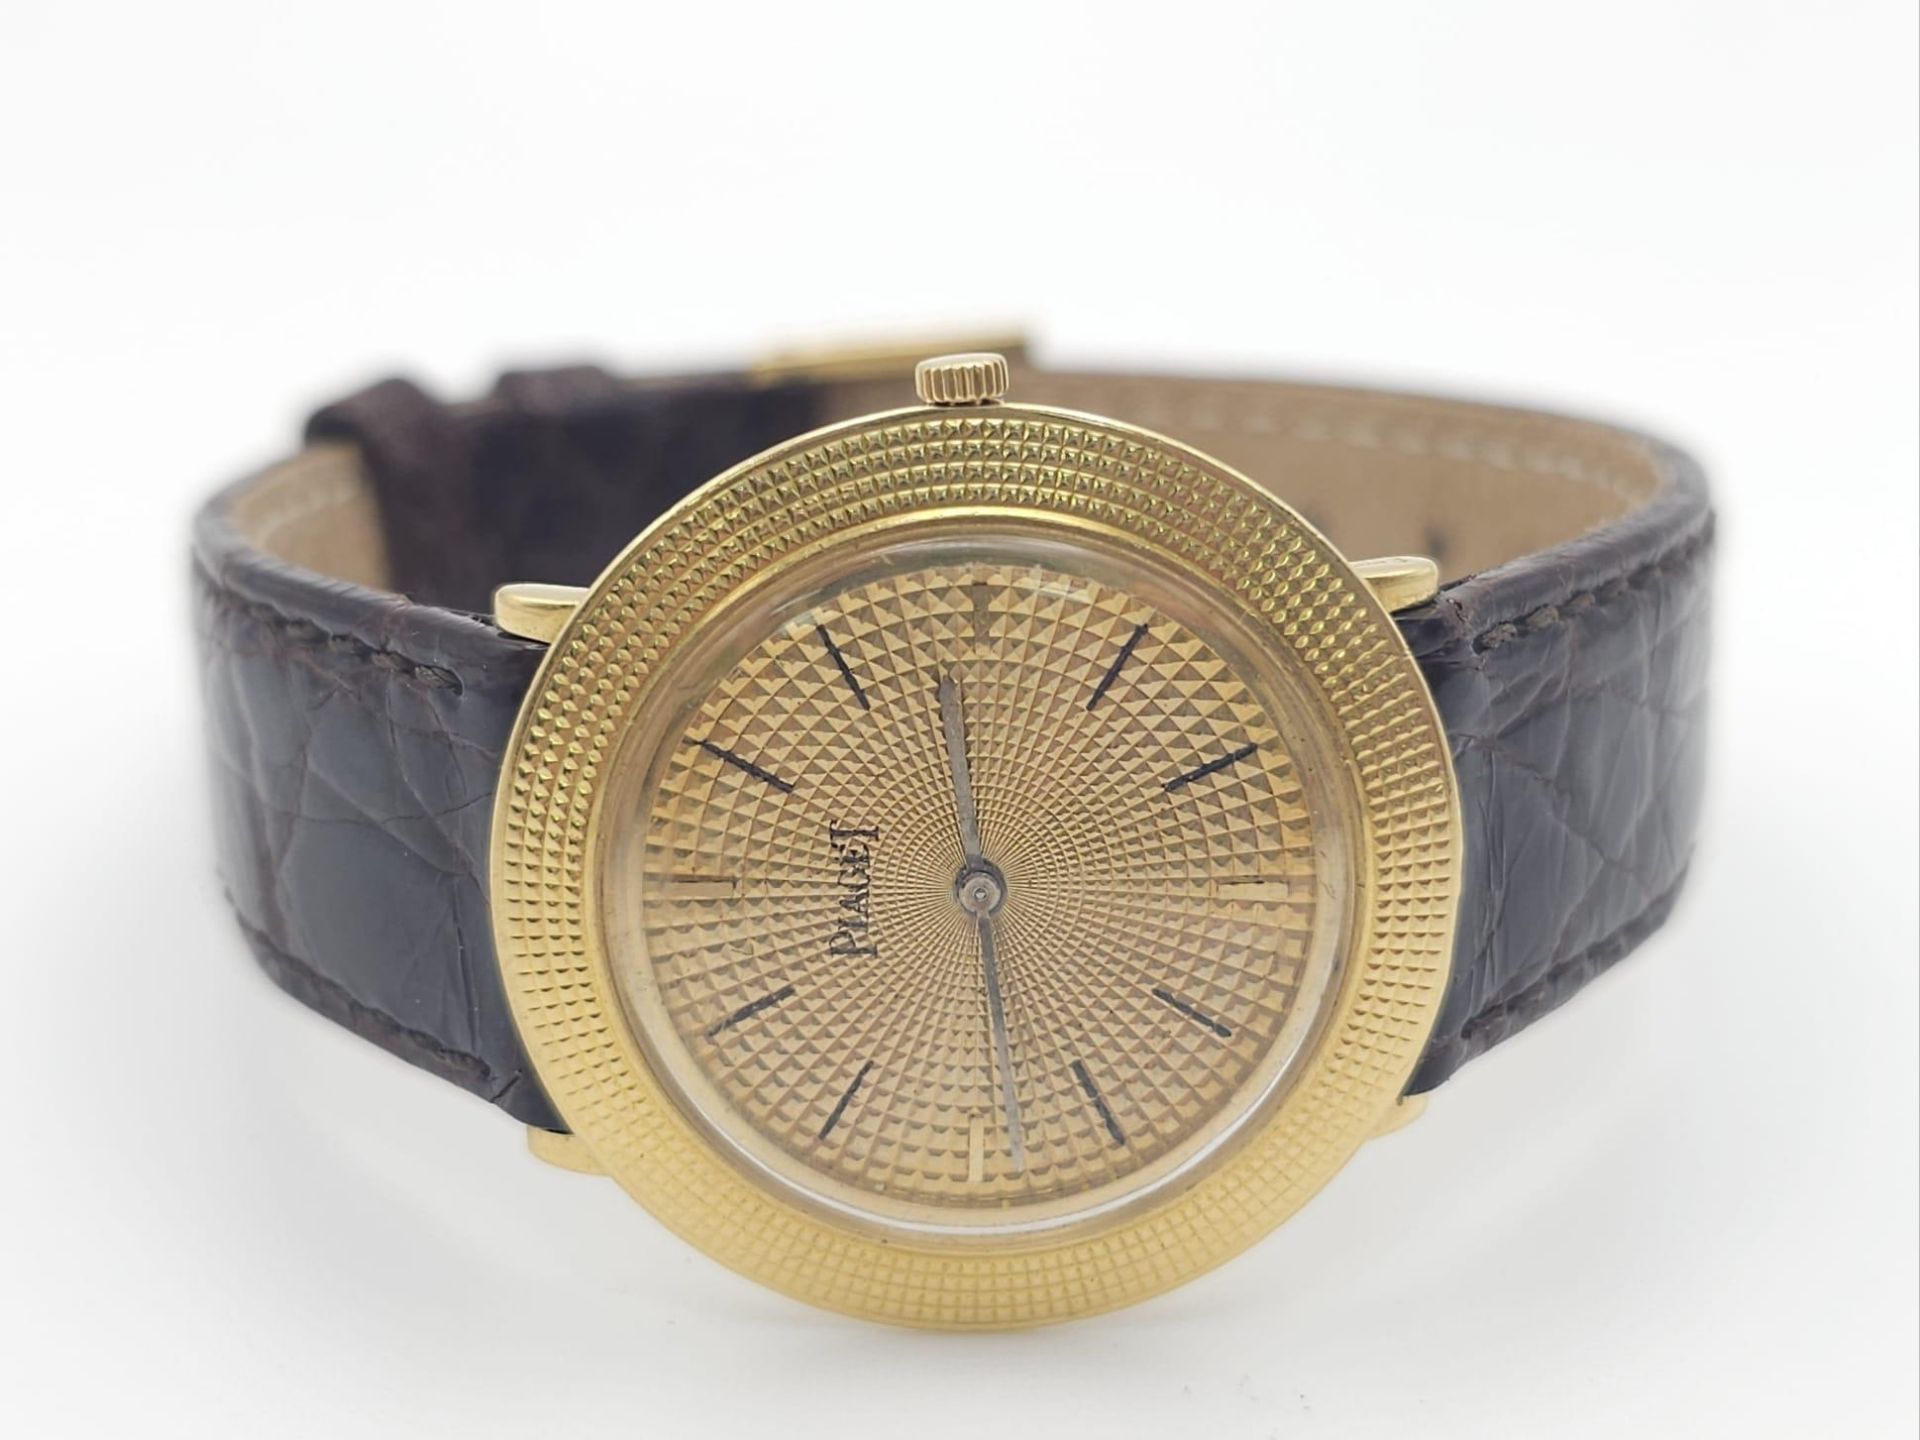 A Vintage 18K Gold Piaget Gents Watch with Hypnotic Dial. Brown crocodile strap. 18k gold case - - Image 8 of 25